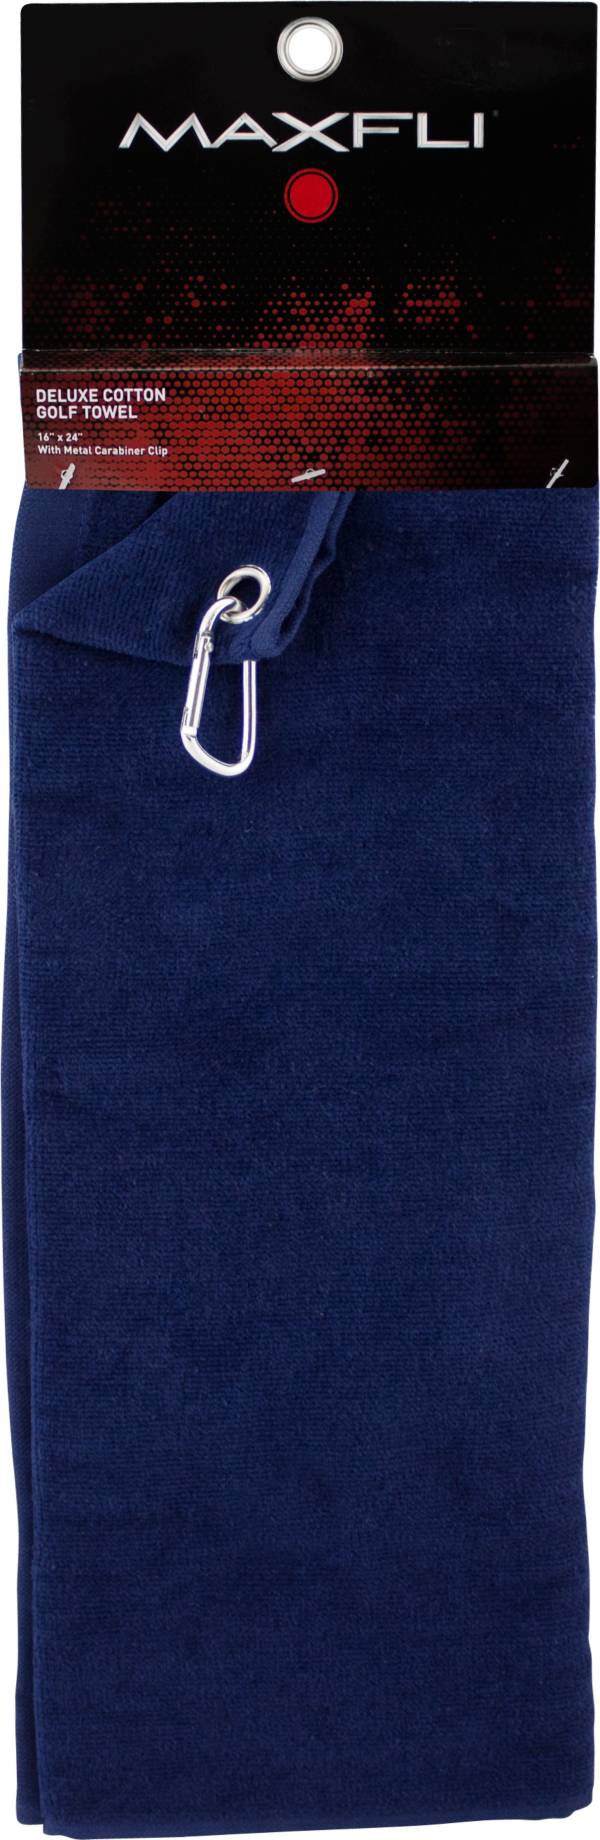 Maxfli Deluxe Cotton Towel product image